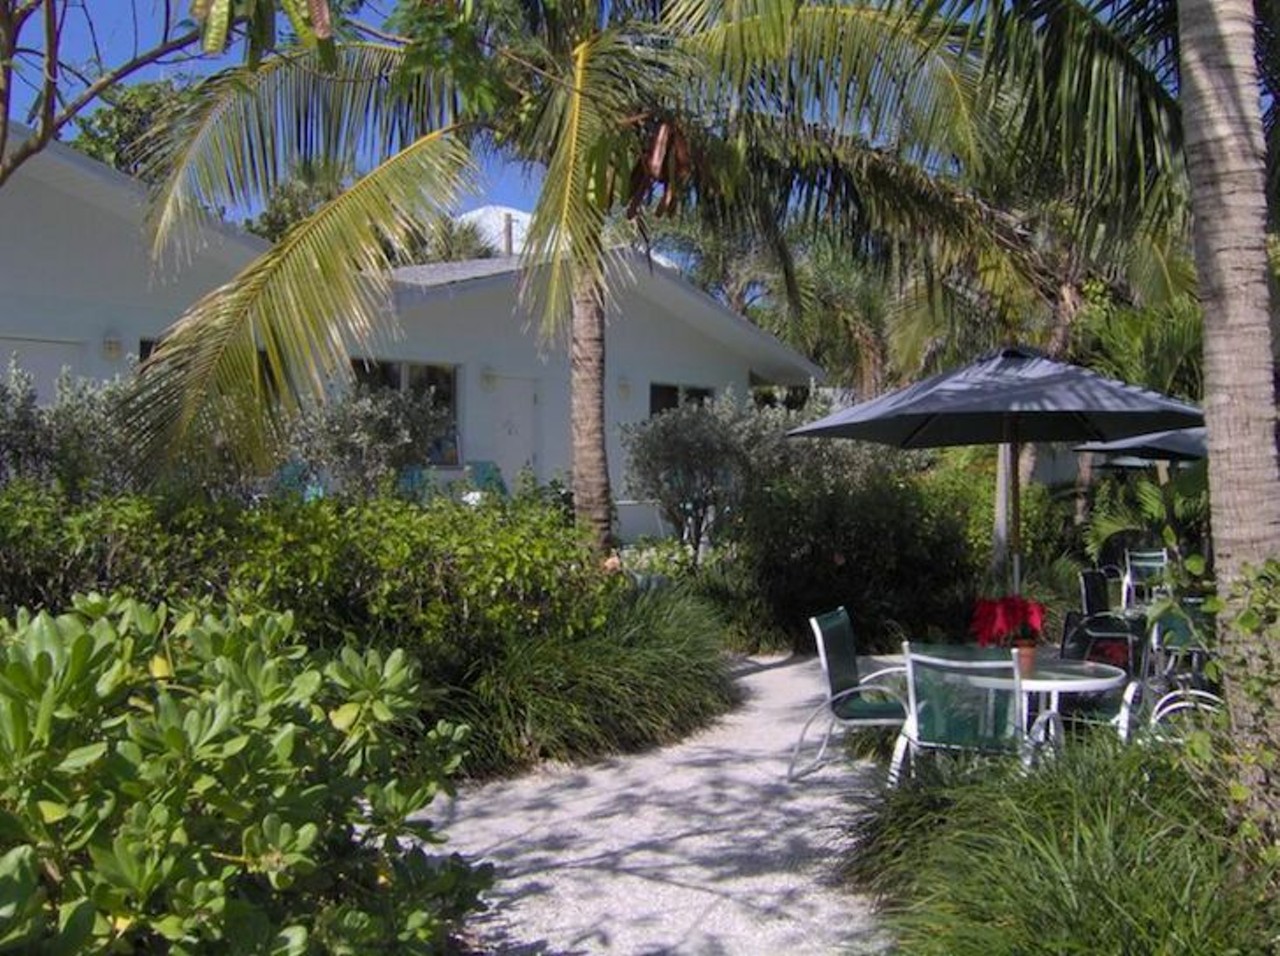 Blue Dolphin Cottages 
4227 West Gulf Drive, Sanibel Island, 239-472-1600
Estimated drive time from Orlando: About 4 hours
Cost per night: $129-$299 
Be careful about taking a stroll down the beach, unless you want to come back with pockets full of beautiful sea shells. The Blue Dolphin property is secluded and affords a picturesque view of the crashing waves and local flora and fauna. With the complimentary bicycles, guests can get around easily and take a dip in the Gulf of Mexico, relax on the shaded lounge chairs, and cook out on the grills. 
Photo via bluedolphincottages.com